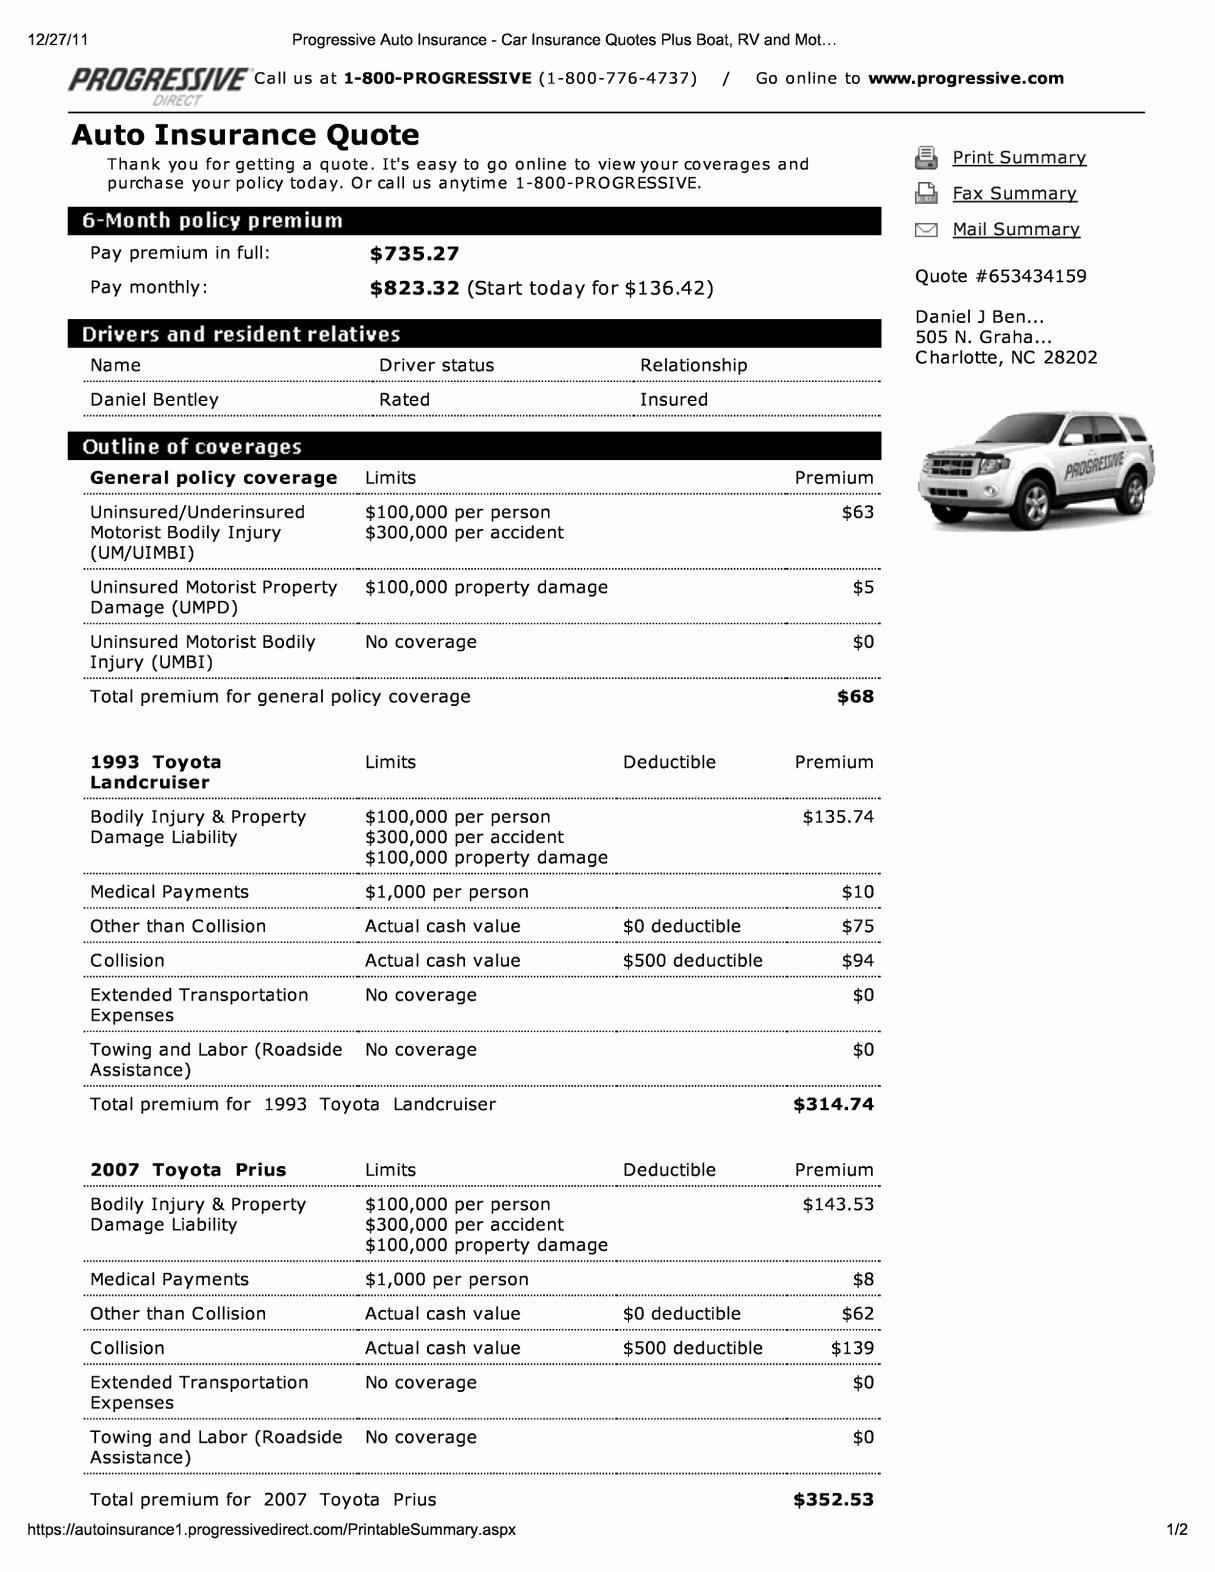 Auto Insurance Card Templates Best Of Progressive Auto Insurance Card Template